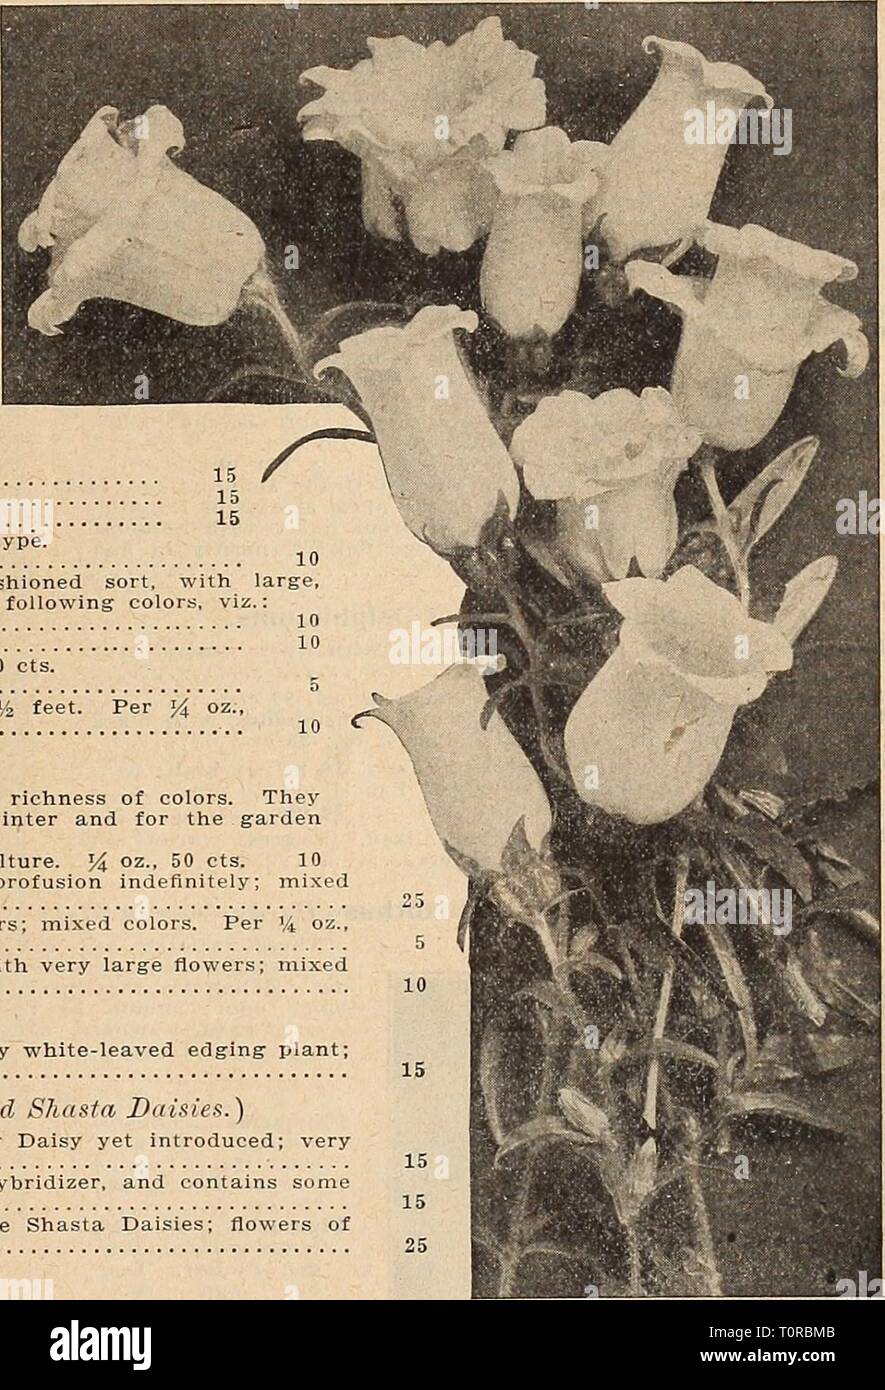 Dreer's autumn catalogue 1917 (1917) Dreer's autumn catalogue 1917  dreersautumncata1917henr Year: 1917  I HEHRTADRaR -PHILAMliPhlA-m^lif RELIABLE FLOWER SEEDS 73 Campanula {BeUjiower). Per Pkt Carpatica (Carpatliian Hare-Bell). In bloom the whole season; hardy perennial; blue; 6 inches. Per Vi oz., 40 cts —Alba. While-flowered form. Per 54 oz.. 40 CtR Persicifolia (iramlifiora (Peach Bells). One of the finest; grows 2 to 3 feet high, with large flowers; blue —Alba. White-flowering I'yramidalis {The Chimney Bellfloiver). A beautiful, stately plant, either for garden or pot culture; blue. Per 1 Stock Photo